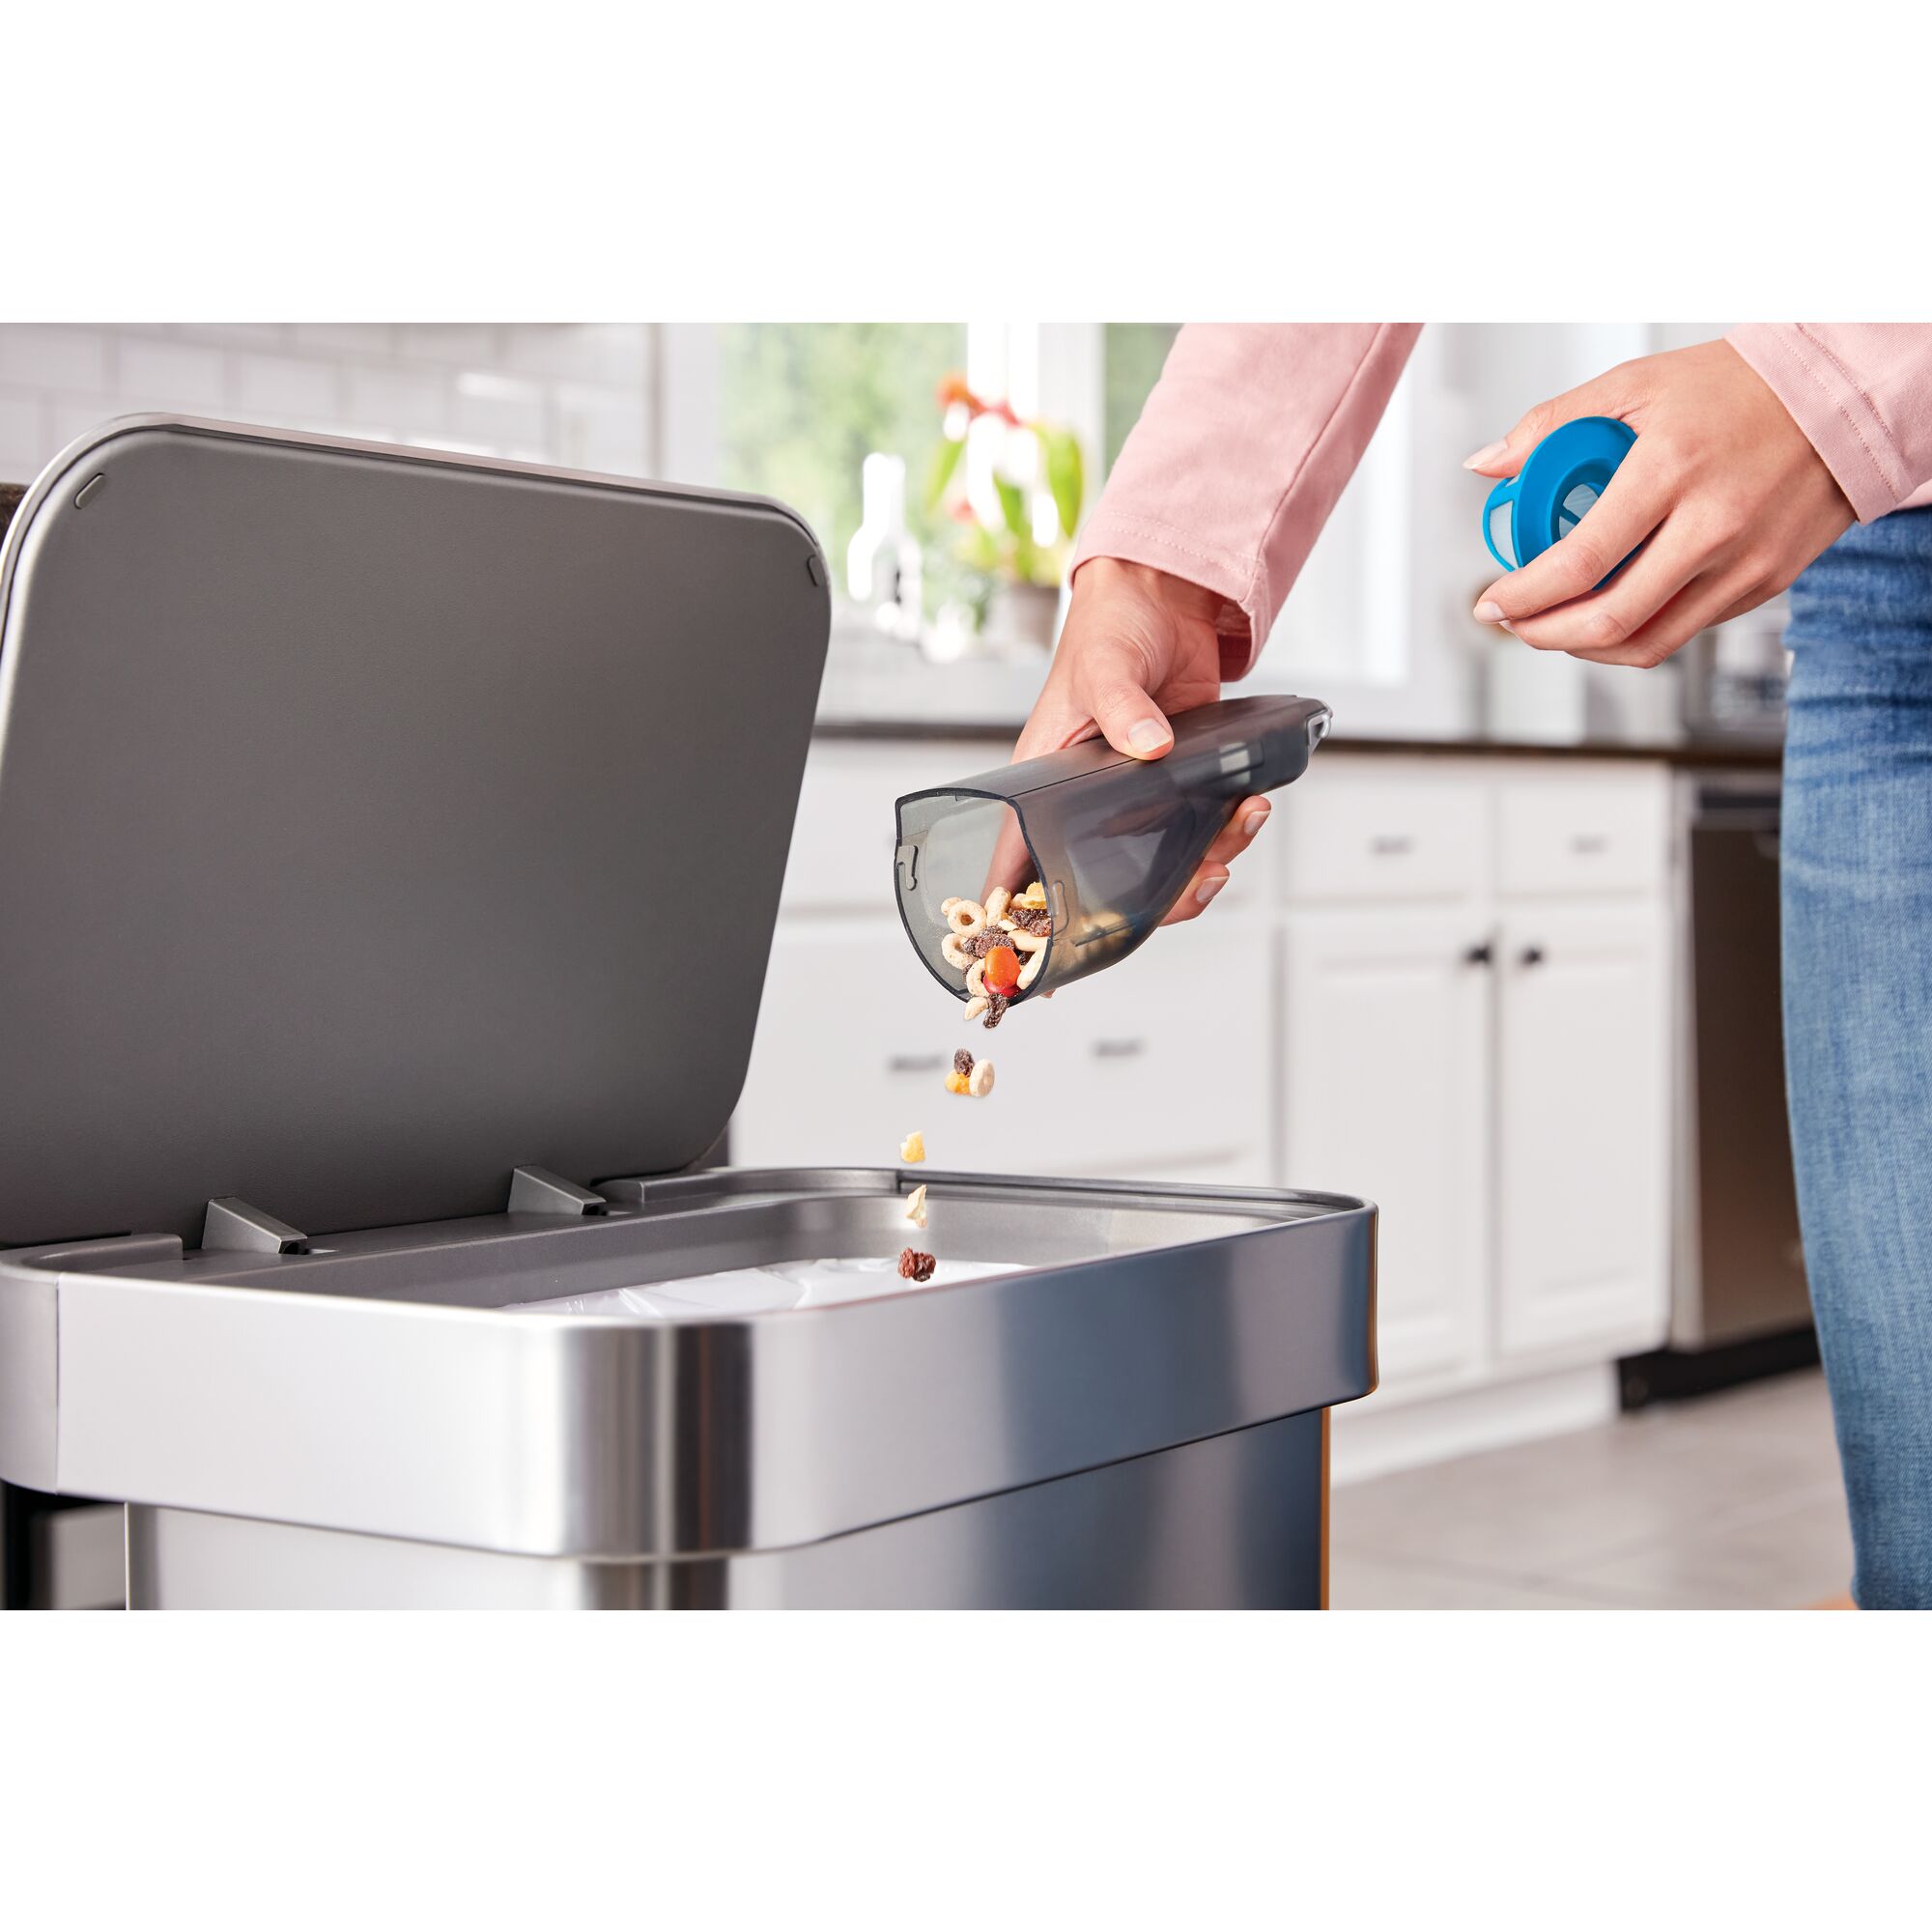 Easy empty dustbin feature of Dustbuster Advanced Clean Cordless Hand Vacuum.